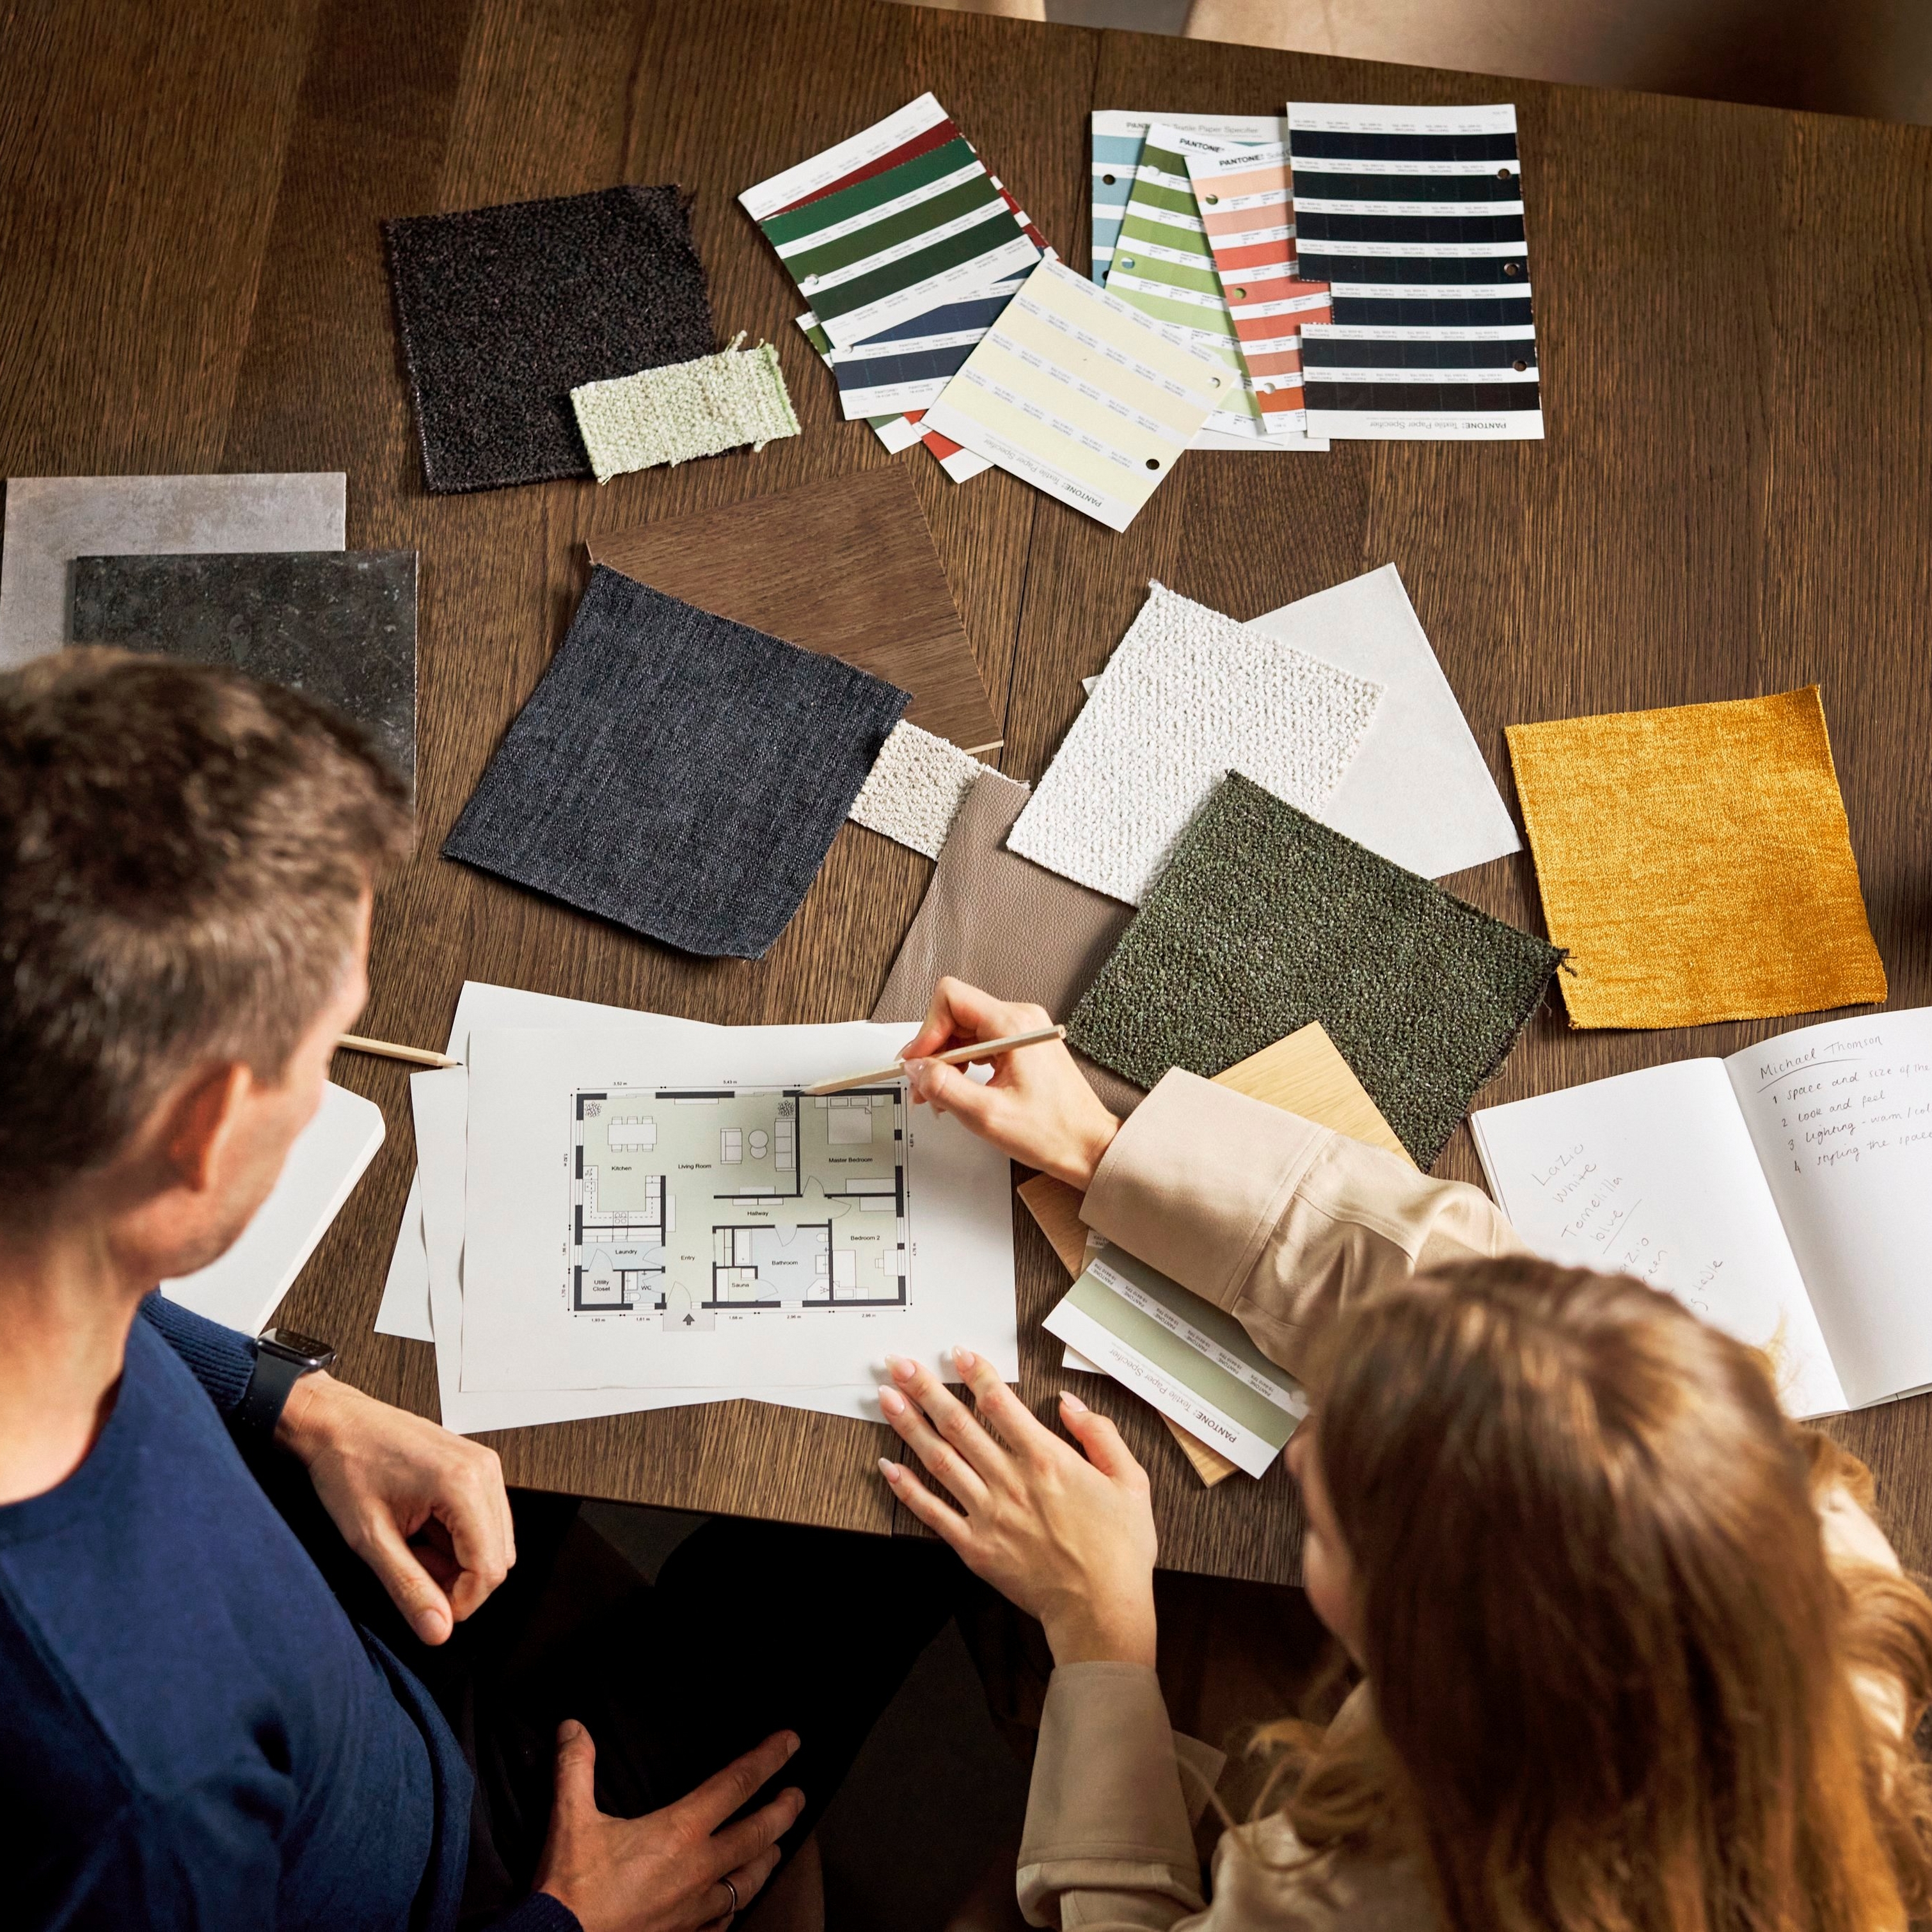 Two individuals reviewing a floor plan amid various fabric swatches on a wooden table